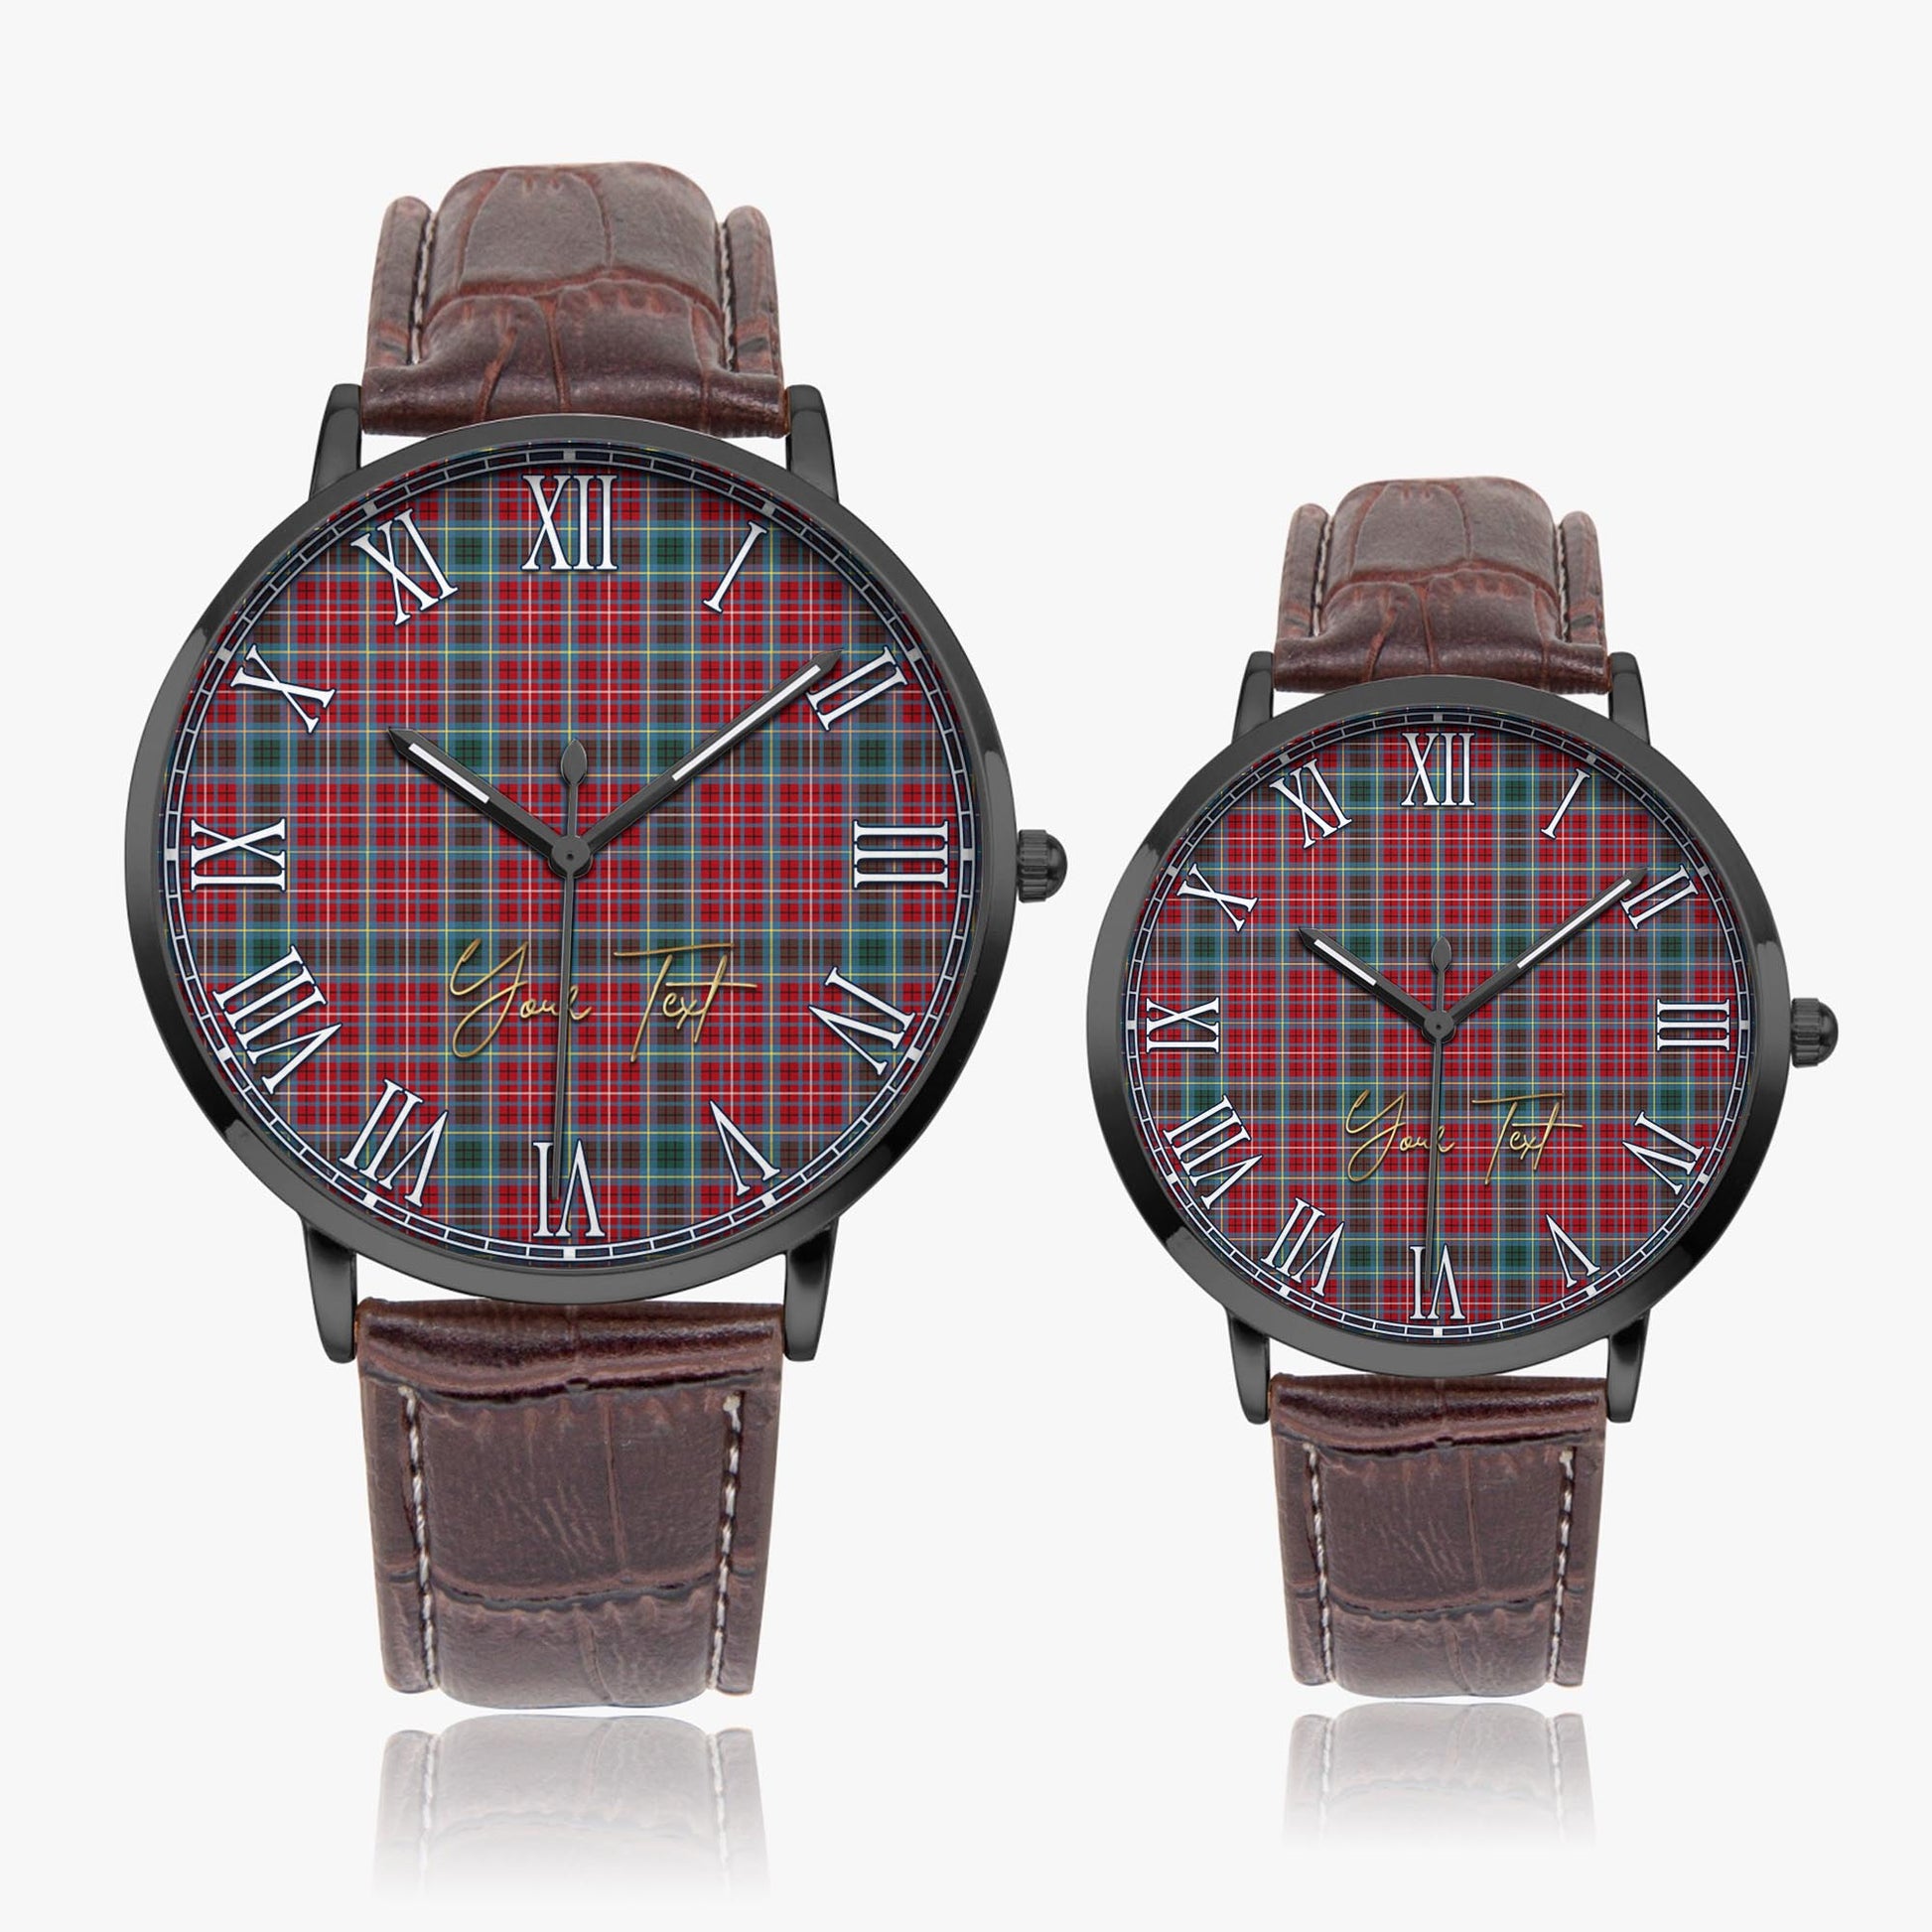 British Columbia Province Canada Tartan Personalized Your Text Leather Trap Quartz Watch Ultra Thin Black Case With Brown Leather Strap - Tartanvibesclothing